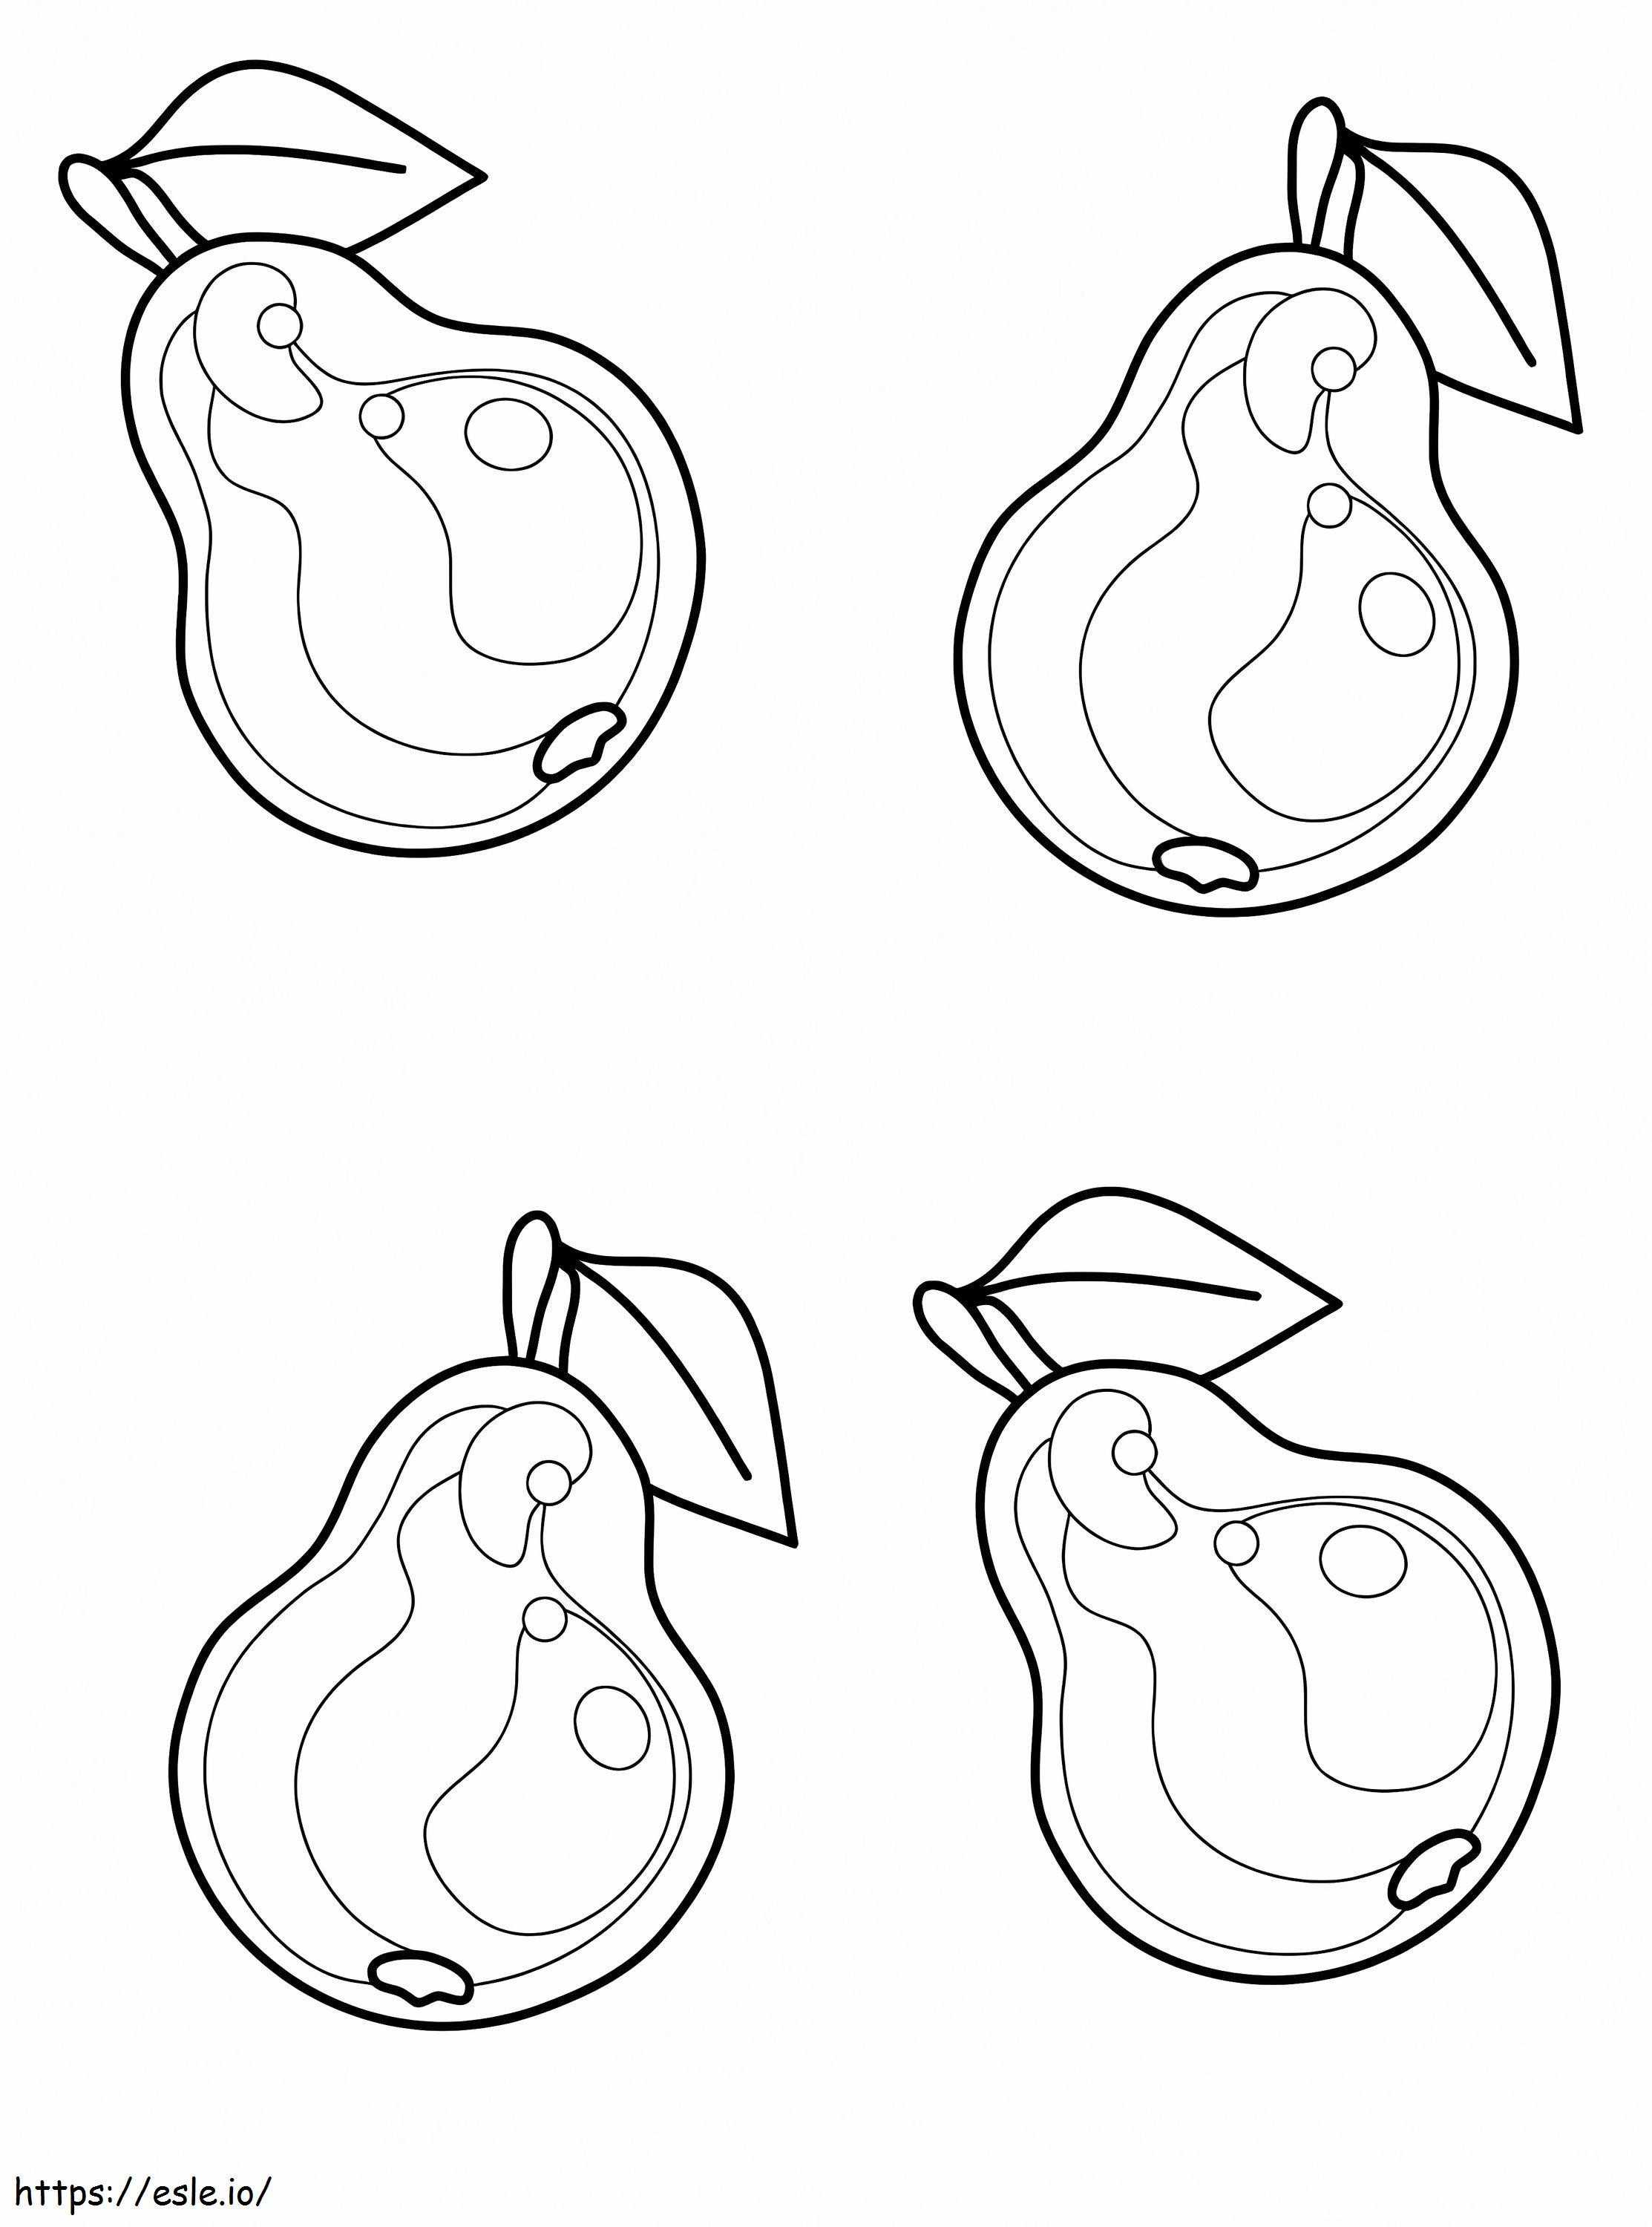 Four Pears coloring page